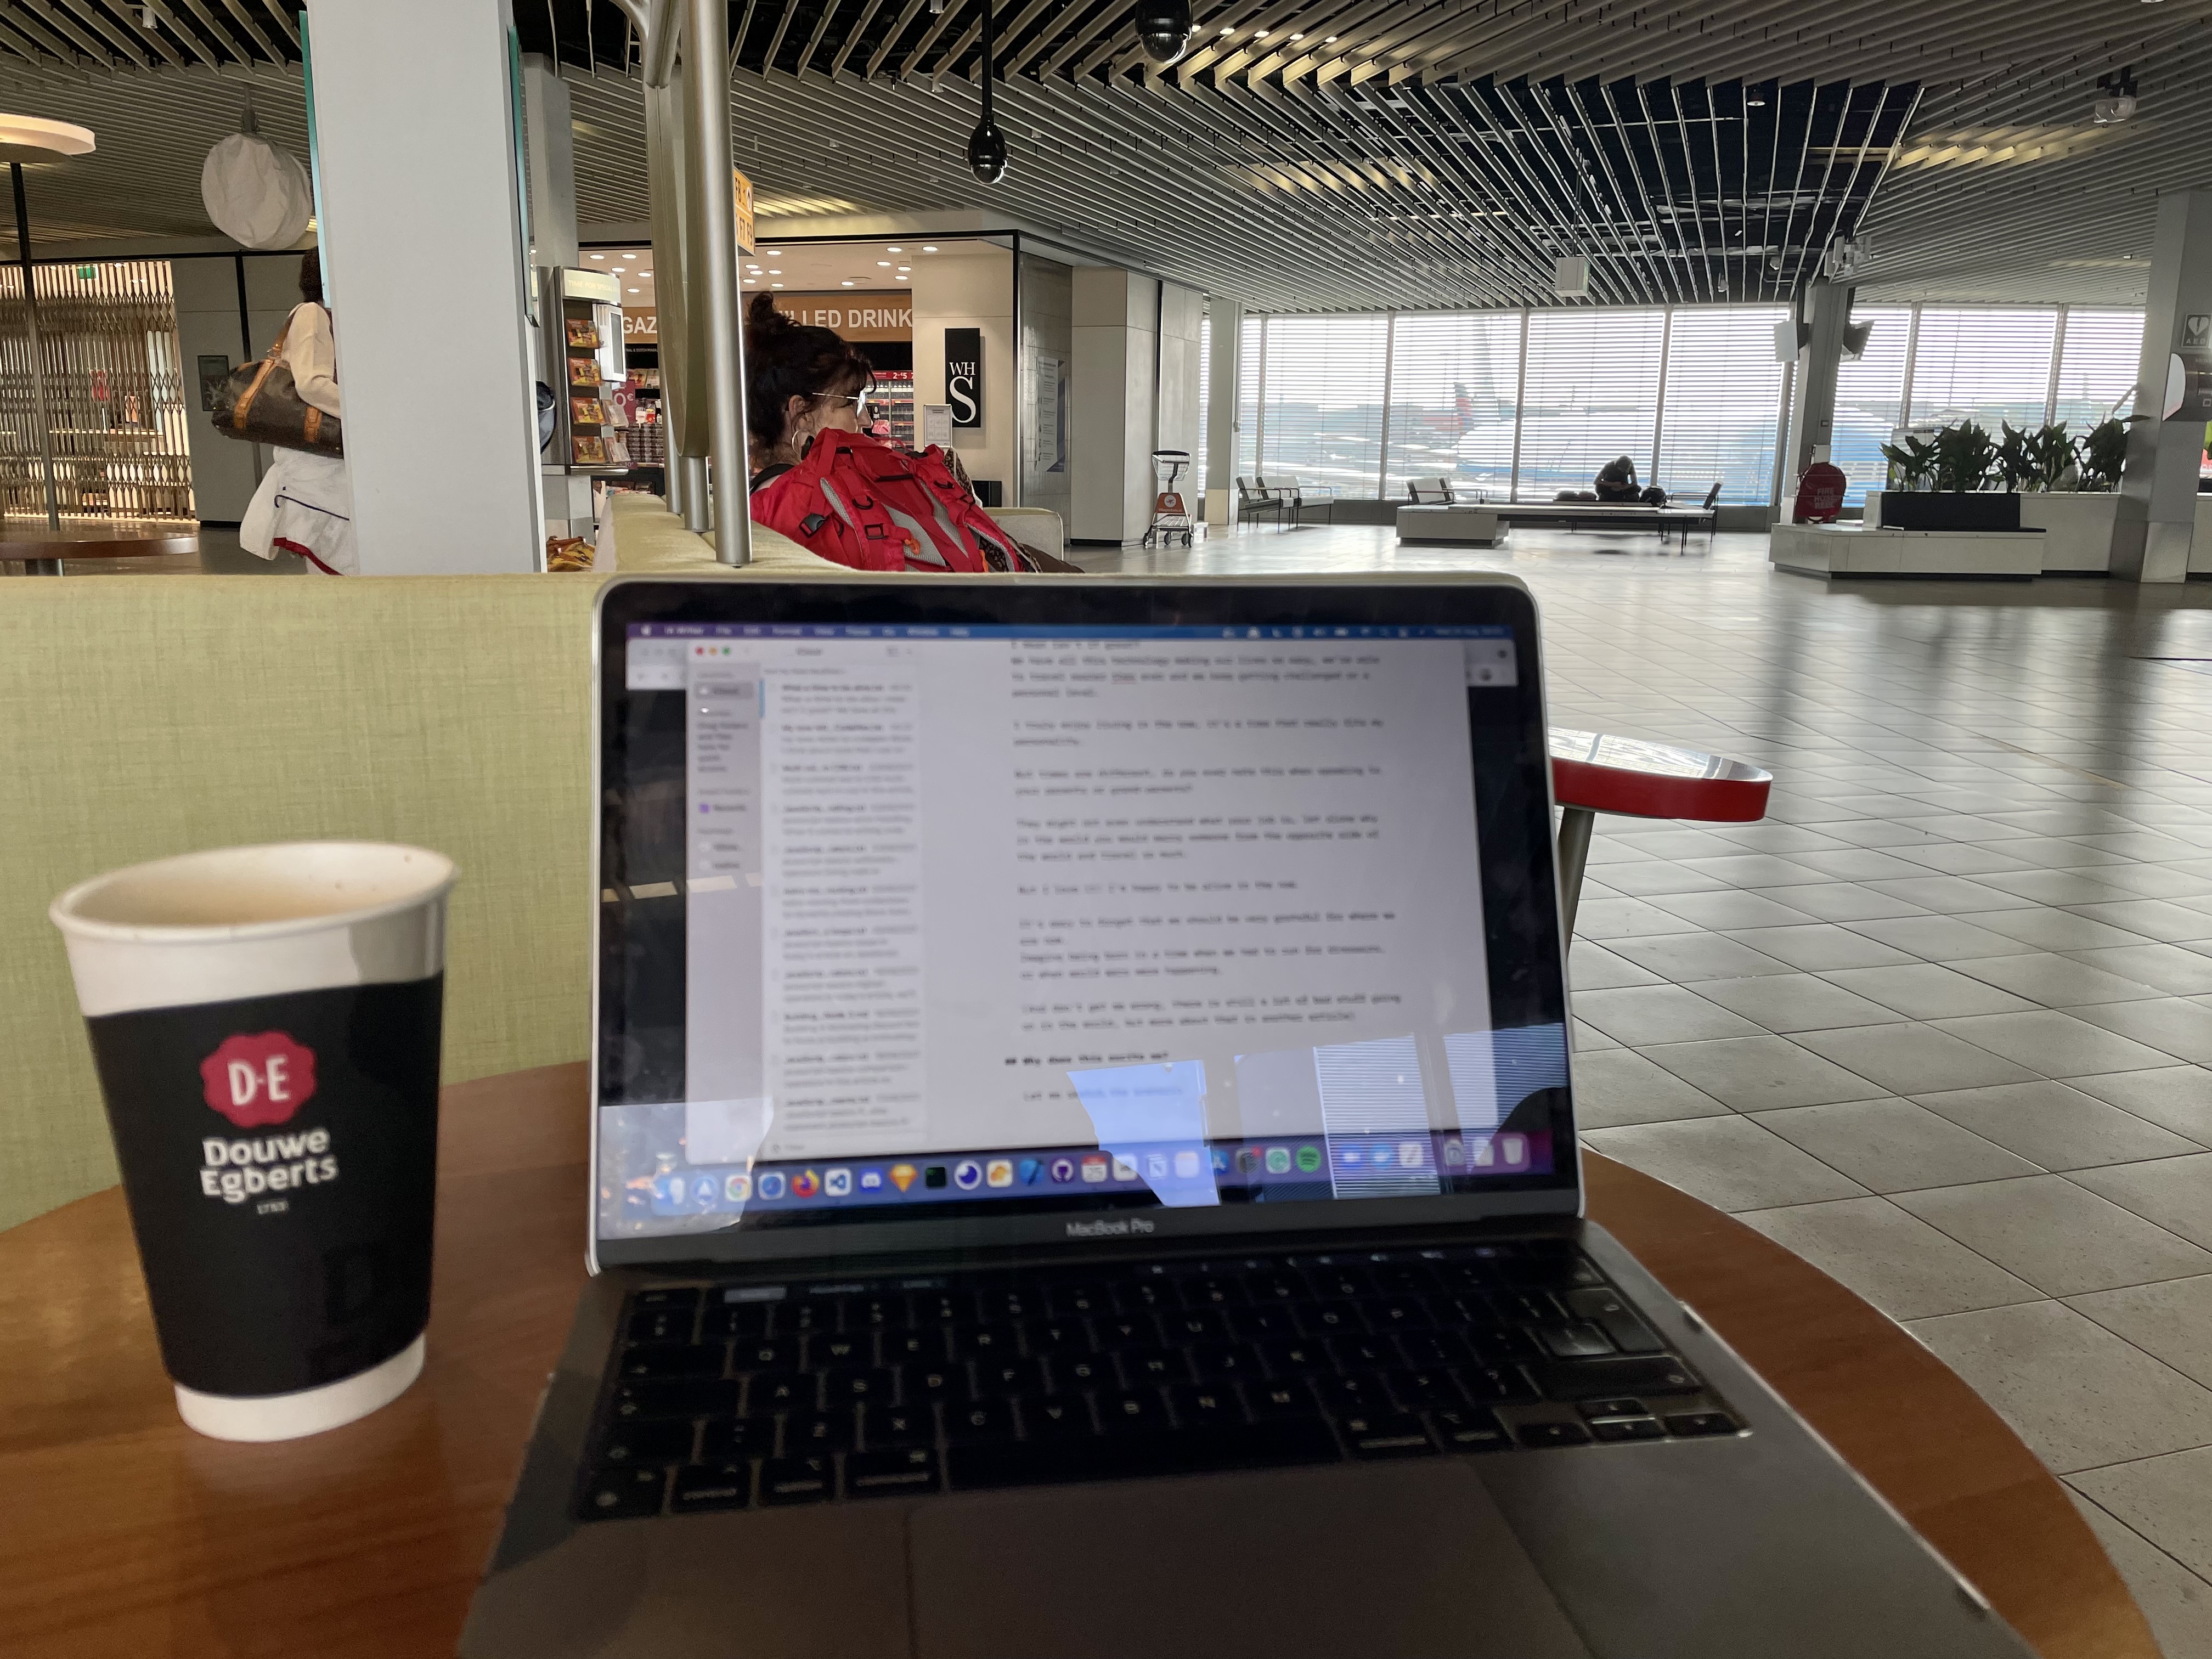 Working from the airport